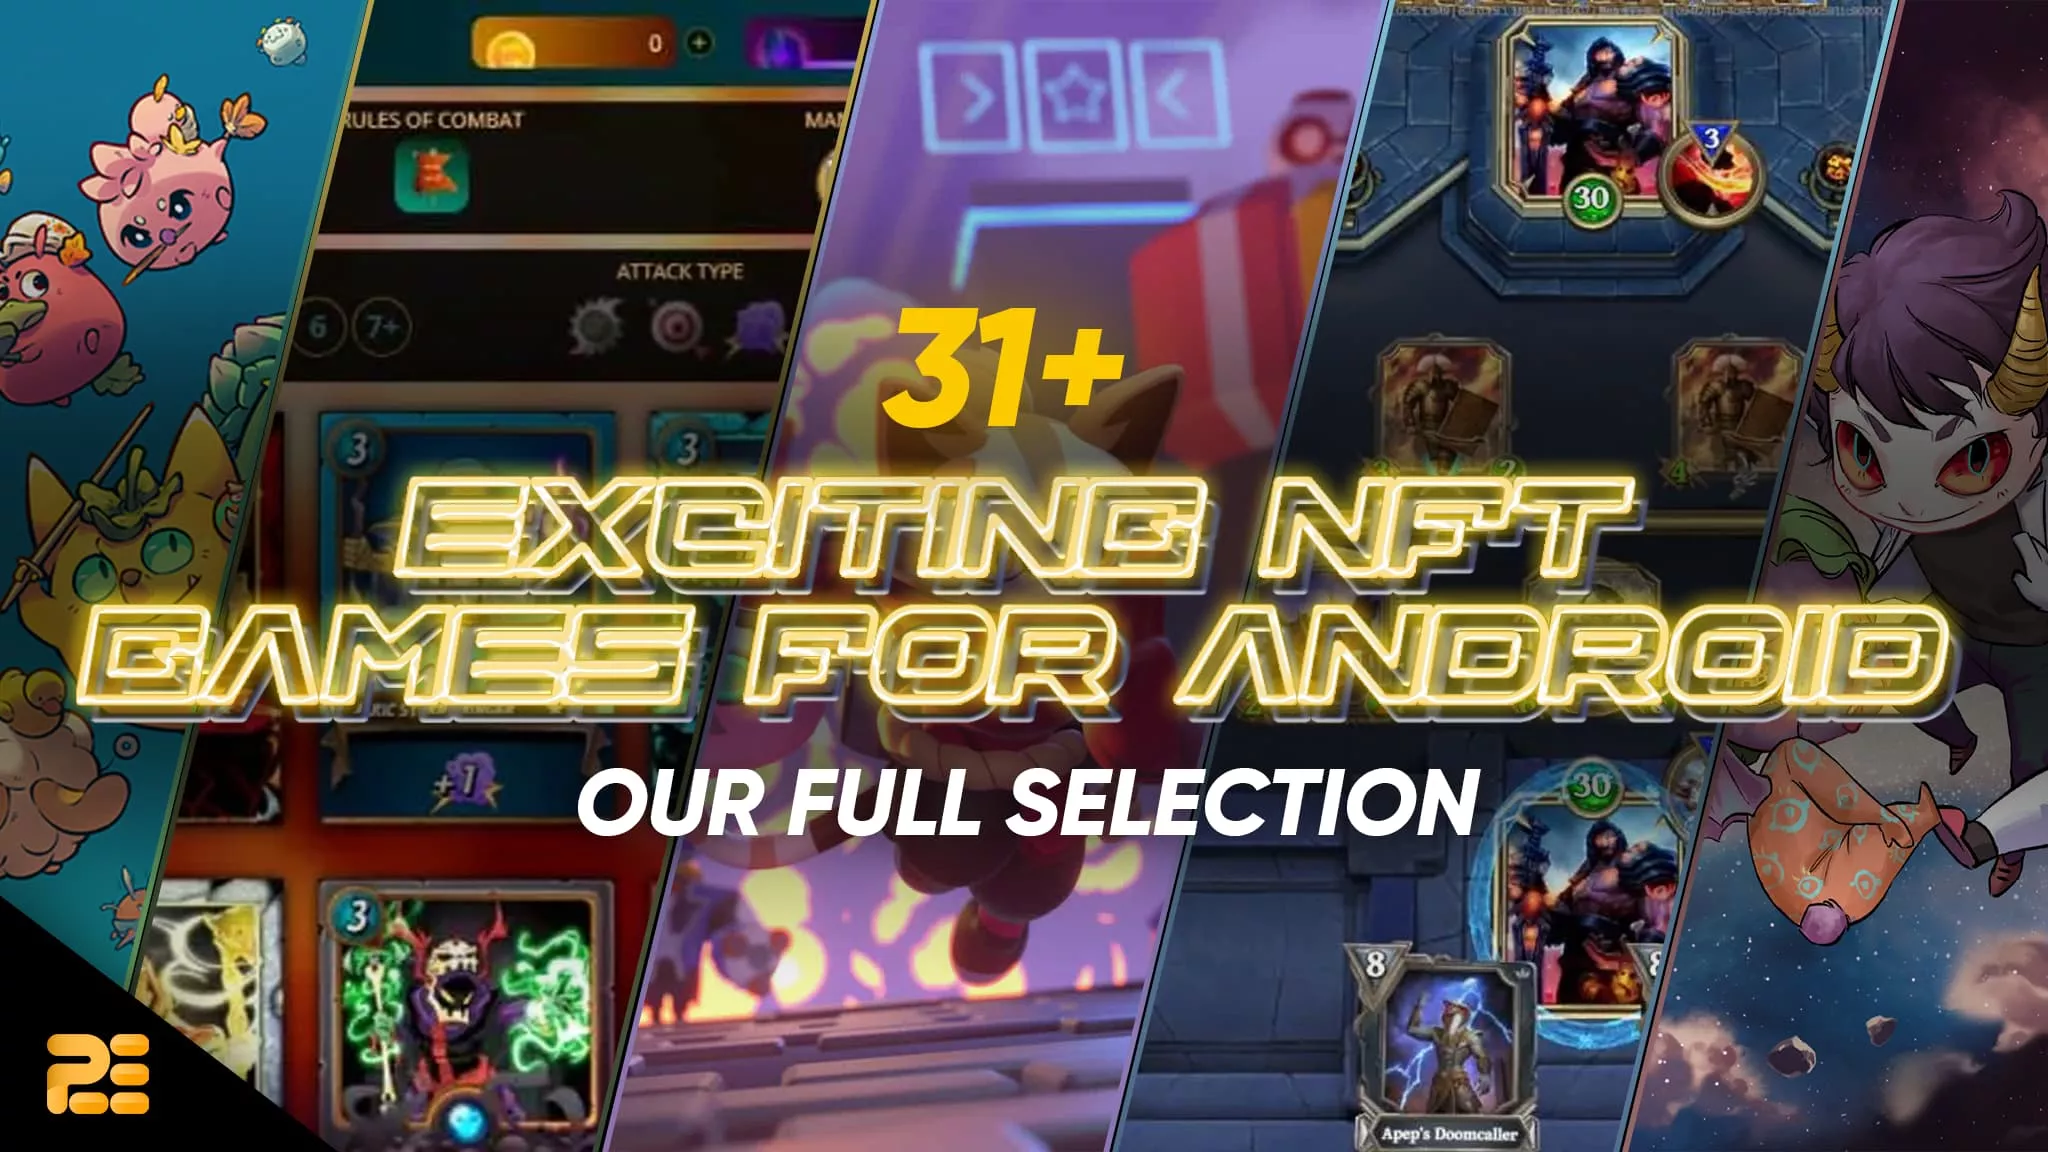 31+ Exciting NFT Games for Android: Our Full Selection